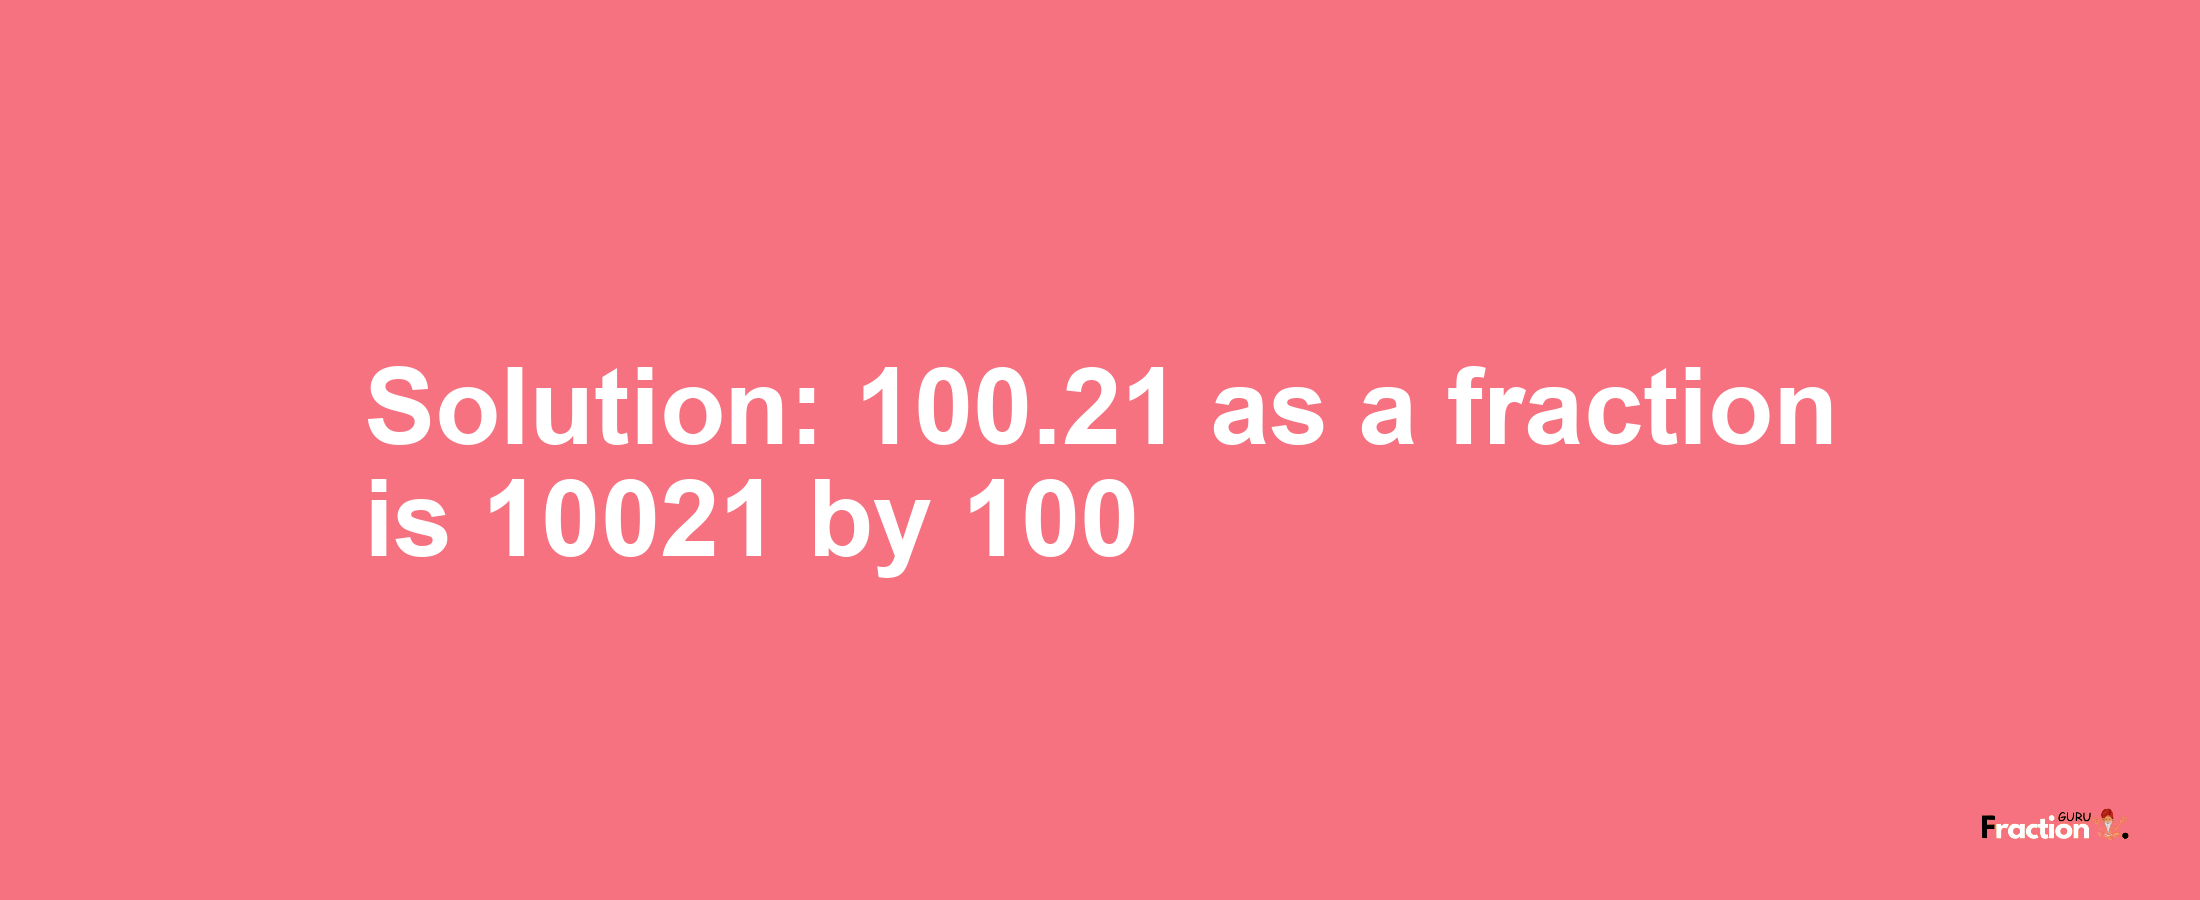 Solution:100.21 as a fraction is 10021/100